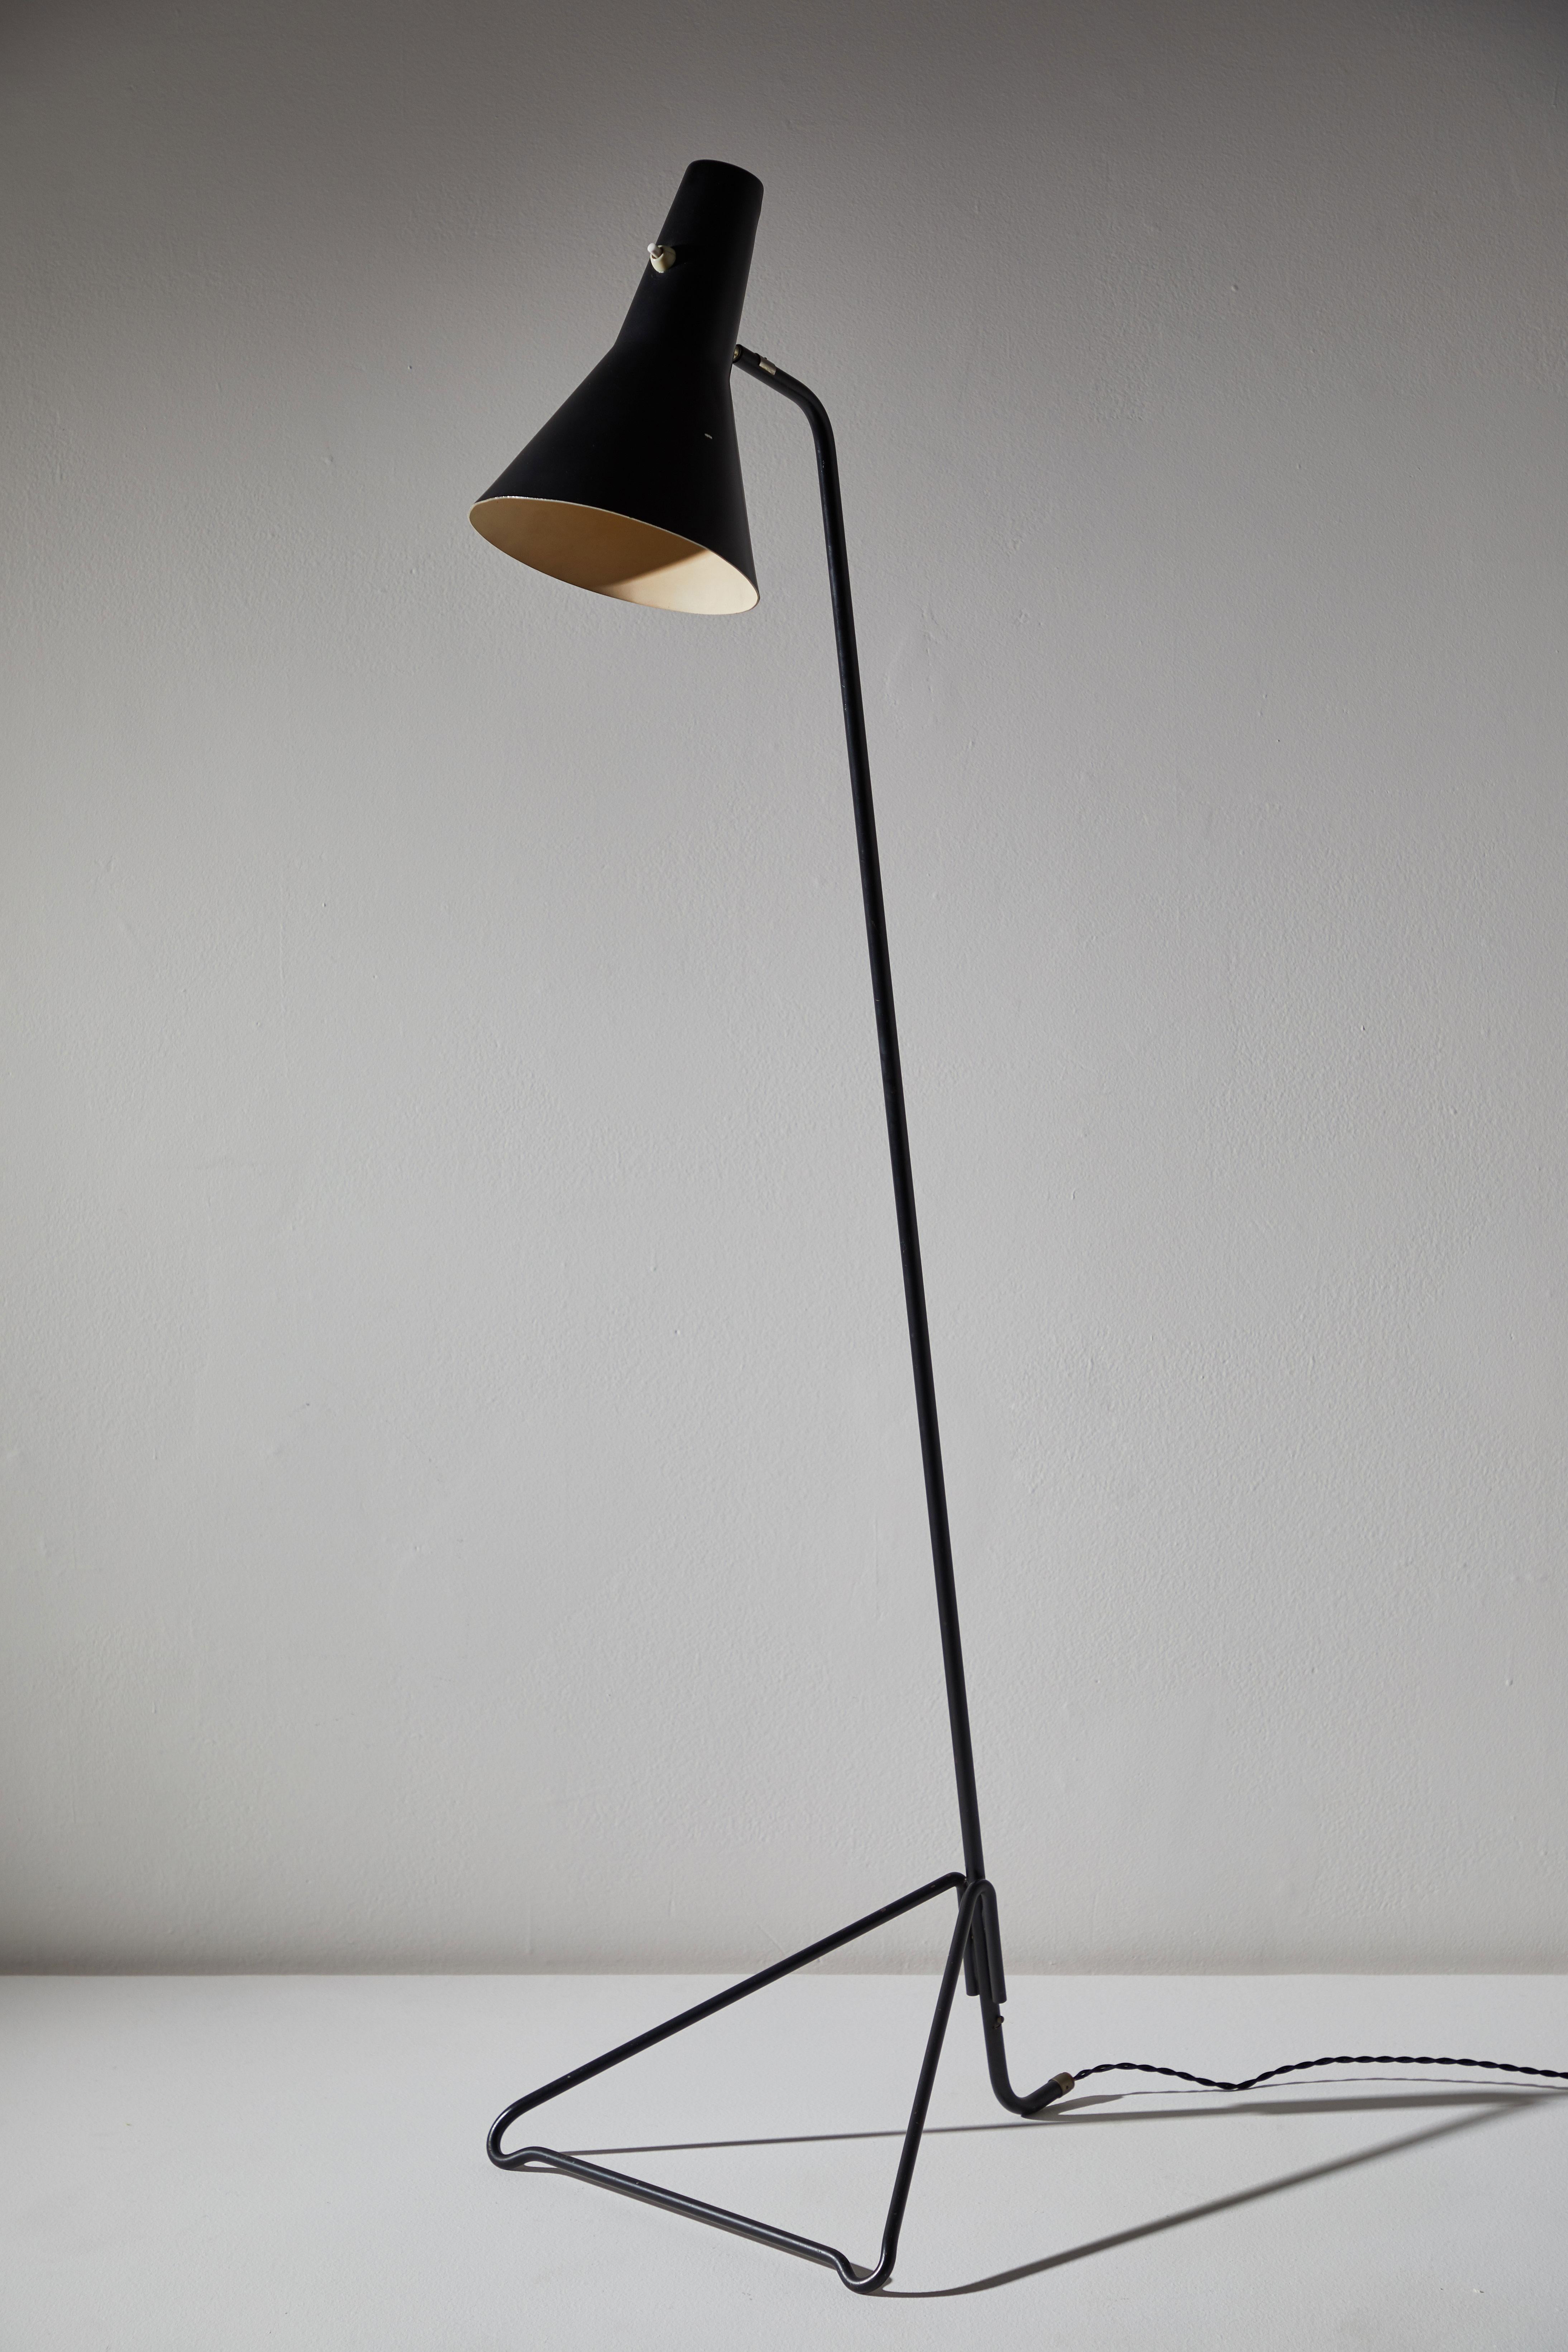 Mid-20th Century Floor Lamp by Svend Aage Holm Sorensen for Asea